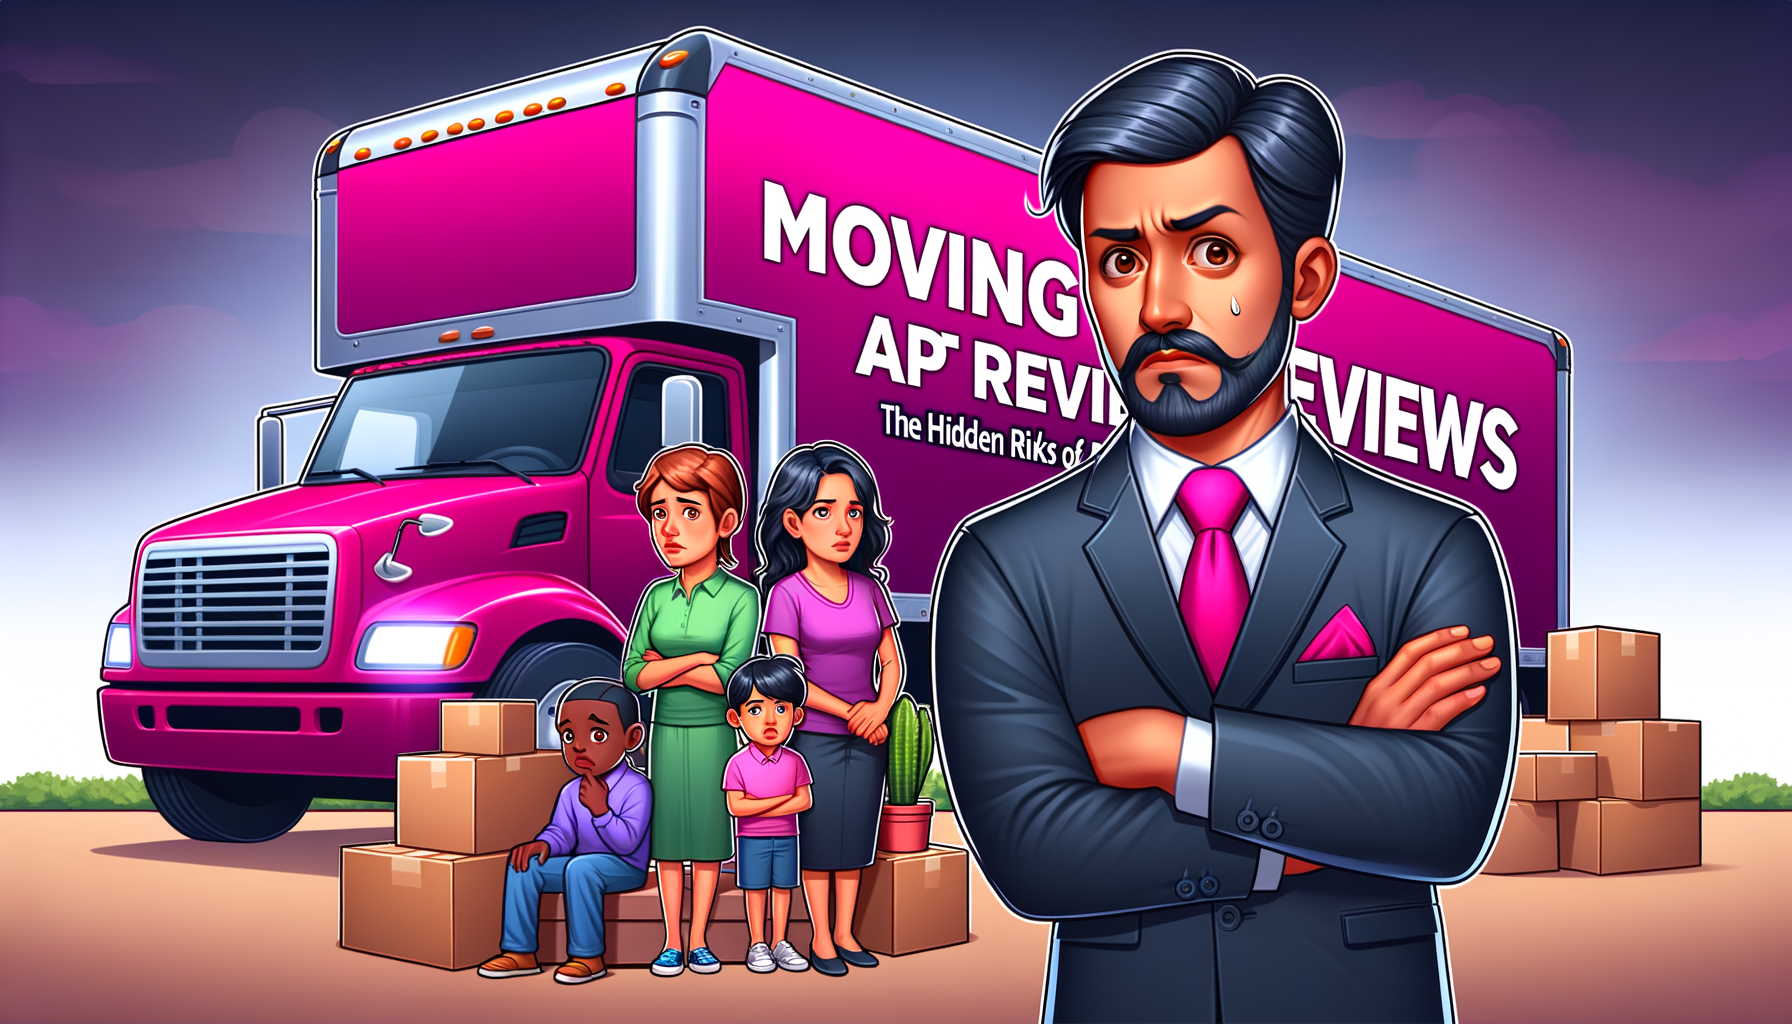 Cartoon illustration of a fuchsia colored moving truck with a concerned family and broker, highlighting the hidden risks of choosing a moving broker.